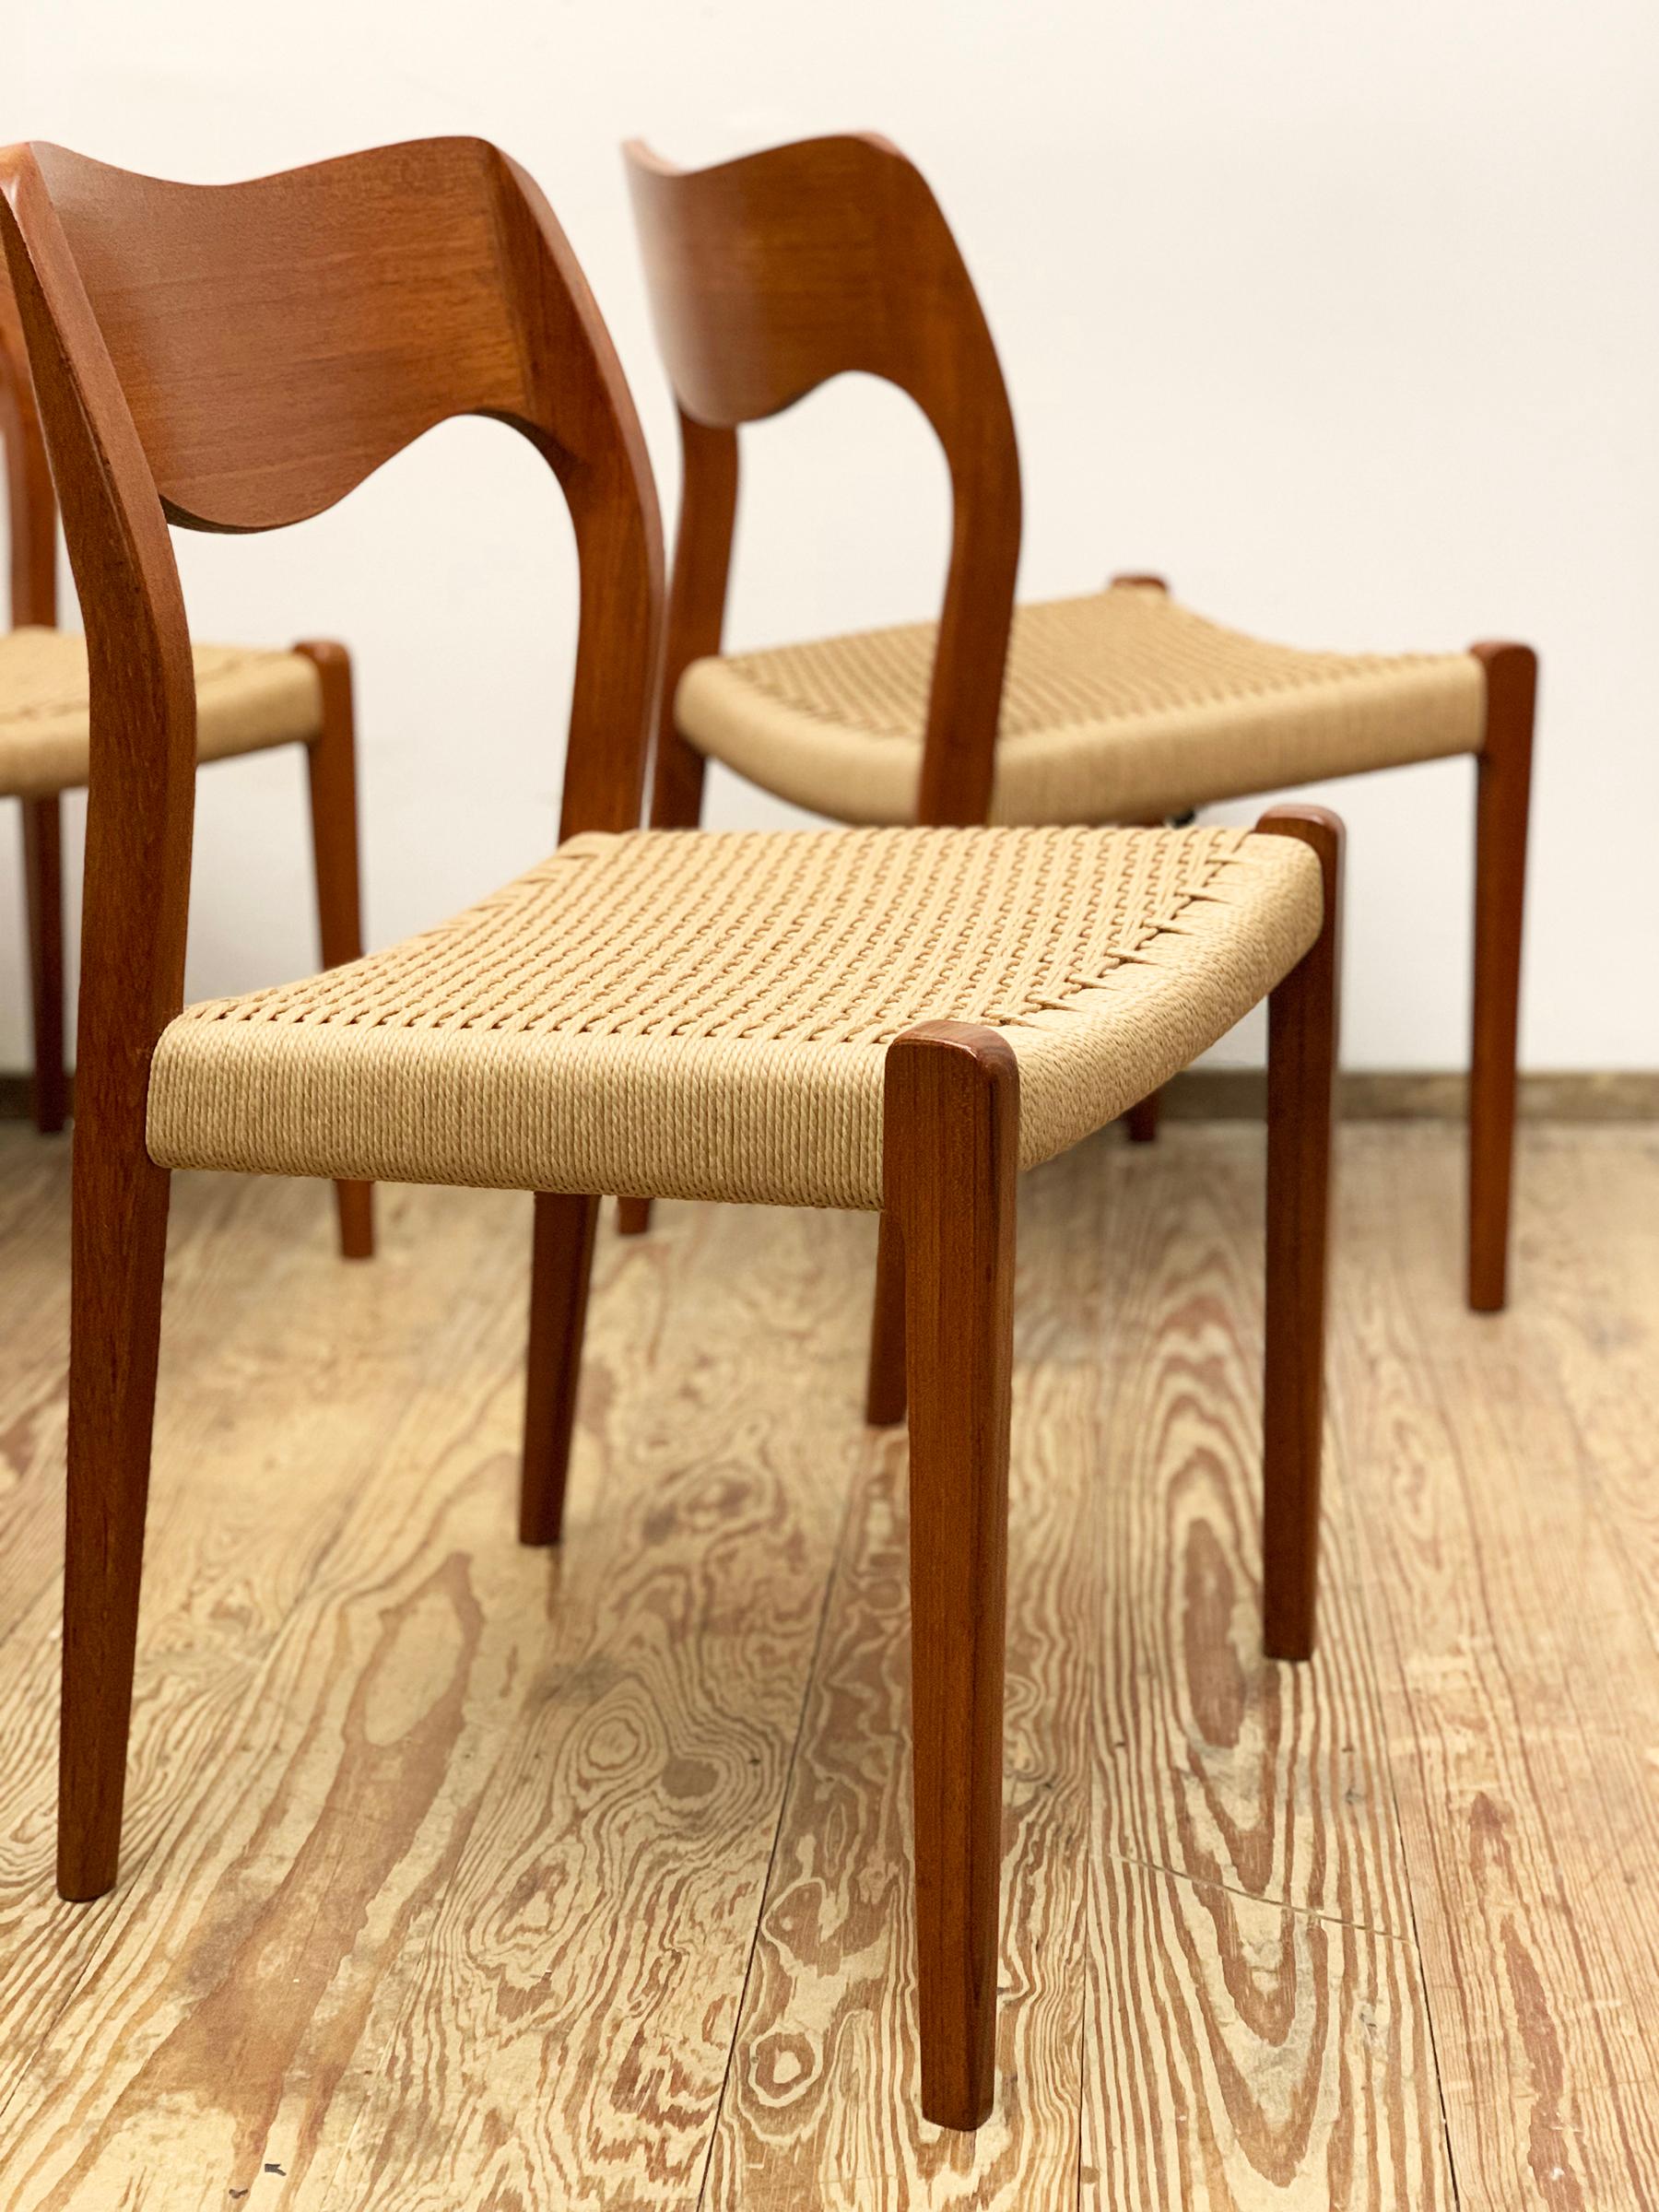 Mid-20th Century Mid-Century Teak Dining Chairs #71 by Niels O. Møller for J. L. Moller, Set of 6